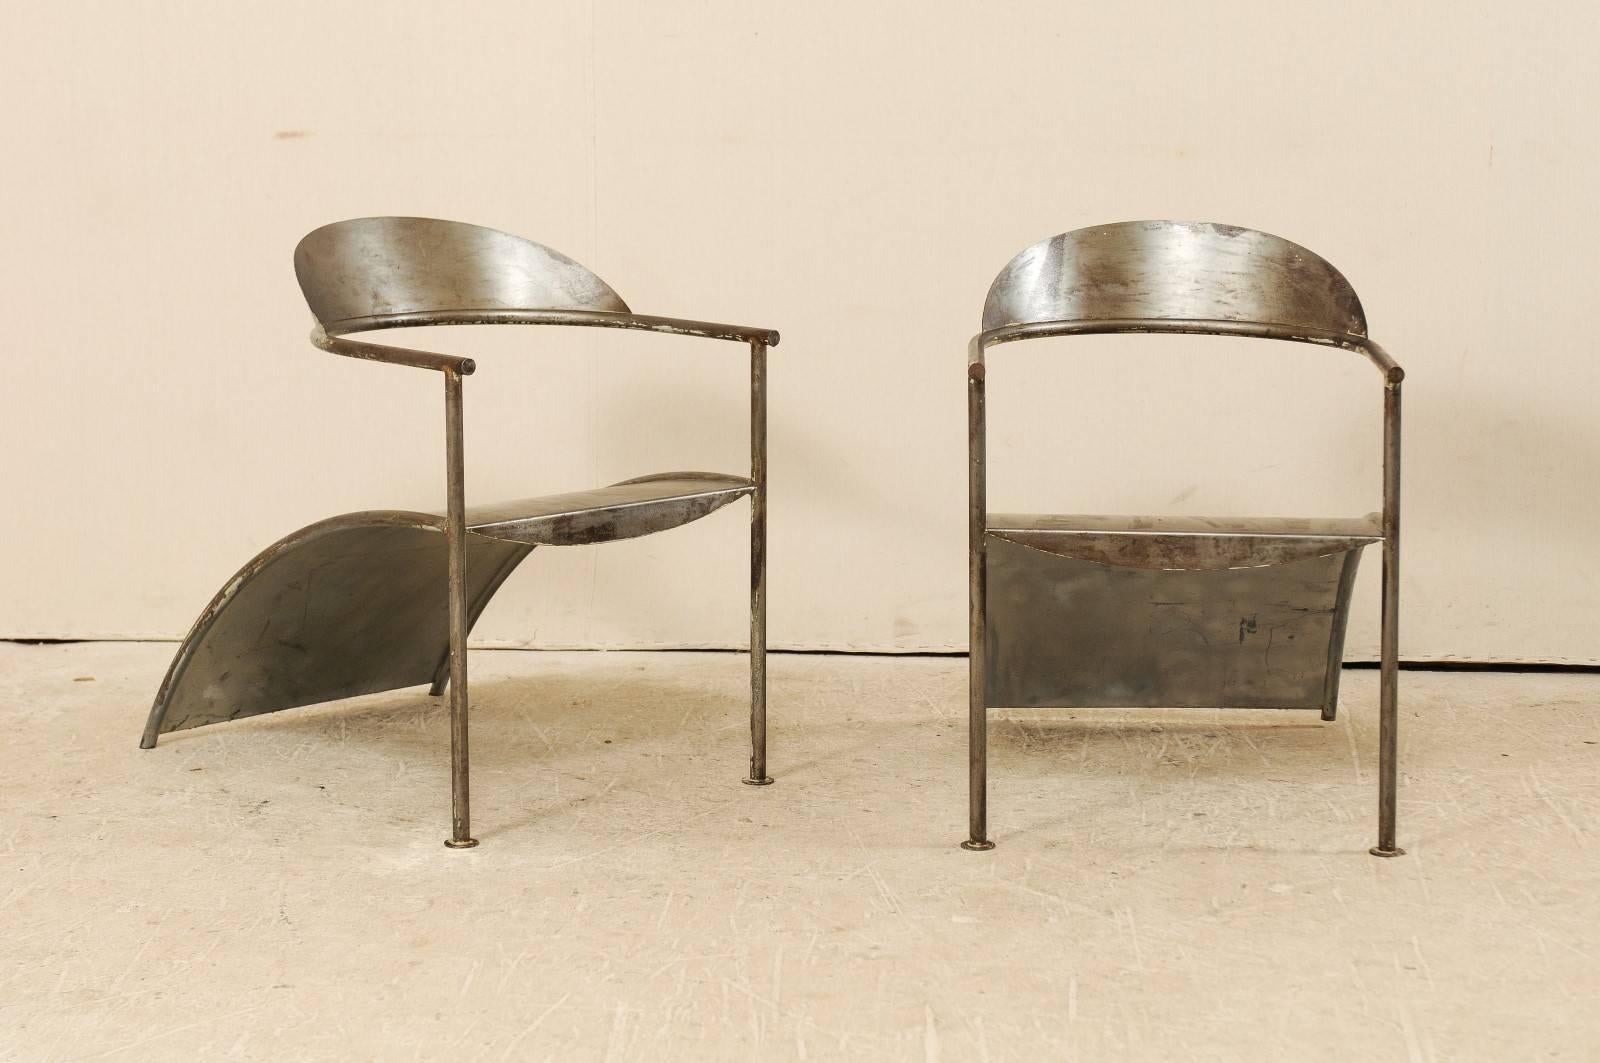 A pair of French metal chairs from designer Philippe Starck. These Philippe Starck metal lounge chairs, circa 1980, are striking and intellectual. Designed in clean lines about the arms and legs, paired nicely with a curved backrest and seat. The